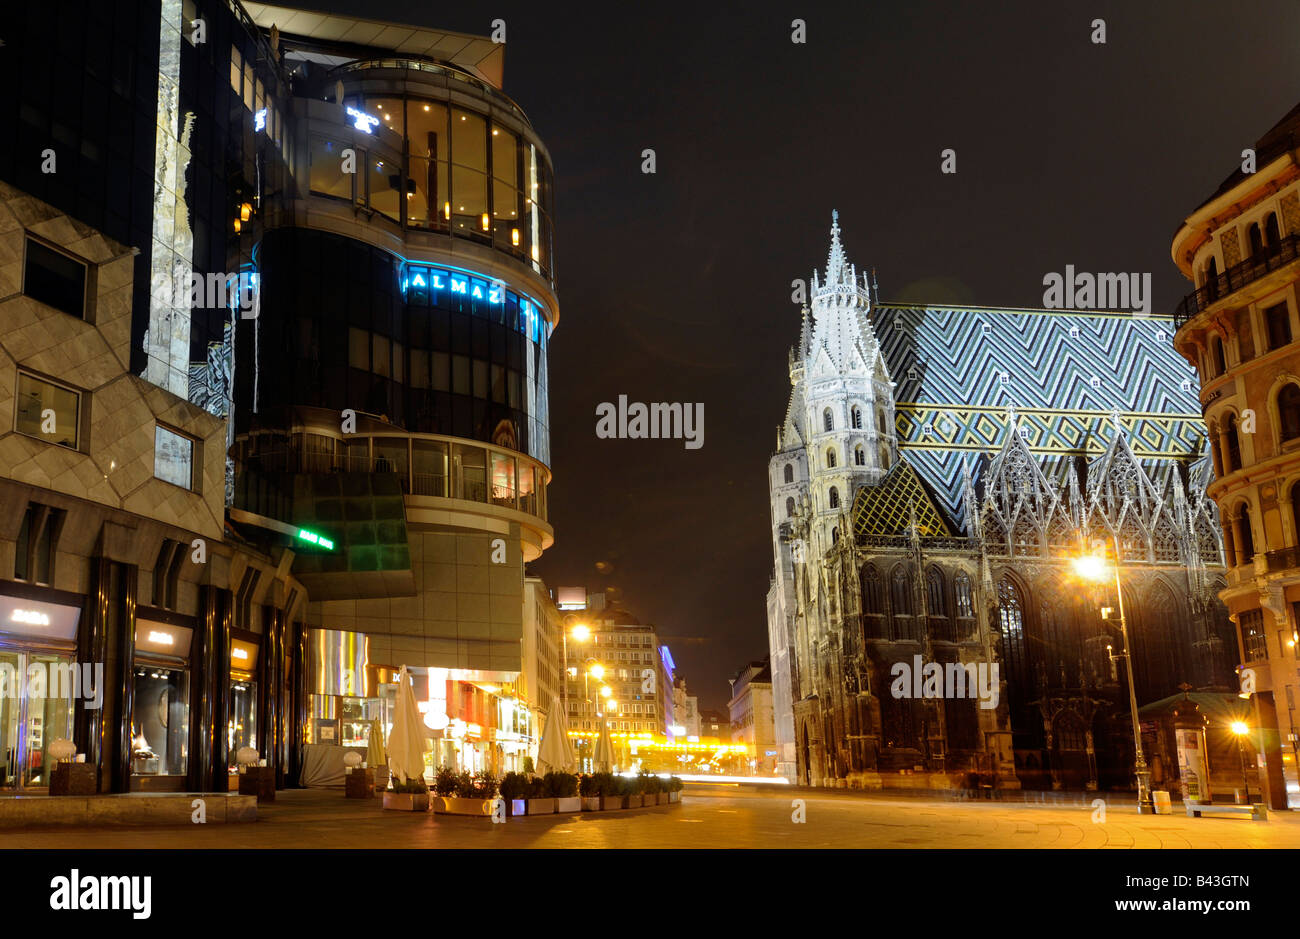 An original night view of Stephansdom, 'Stephen cathedral', an architectural landmark in the centre of Vienna, Austria. Stock Photo